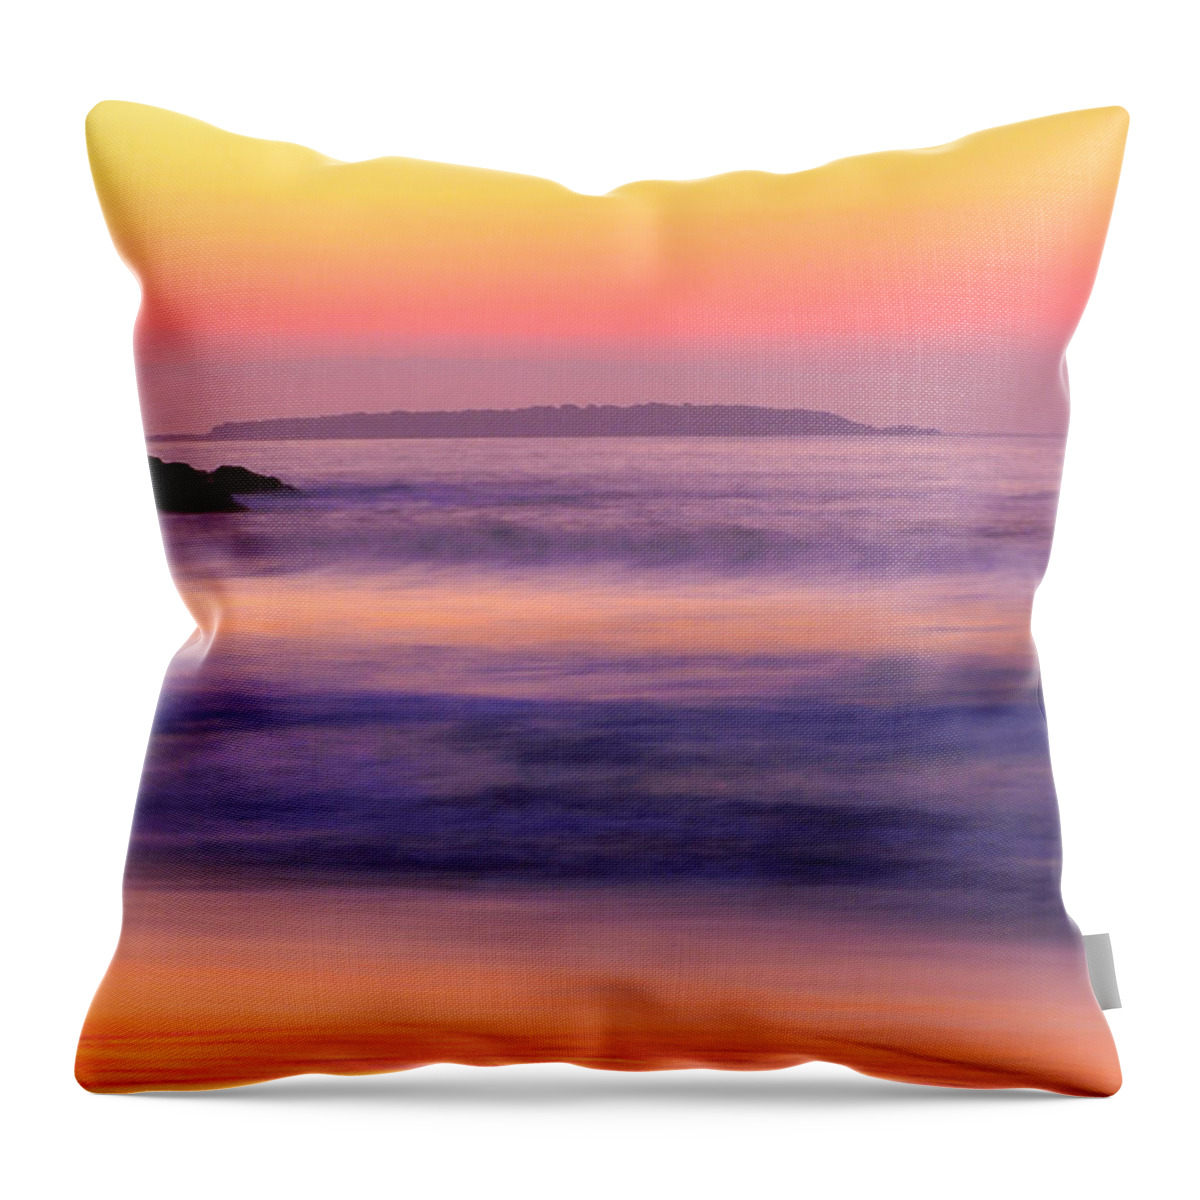 Morning Dream Throw Pillow featuring the photograph Morning Dream Singing Beach by Michael Hubley